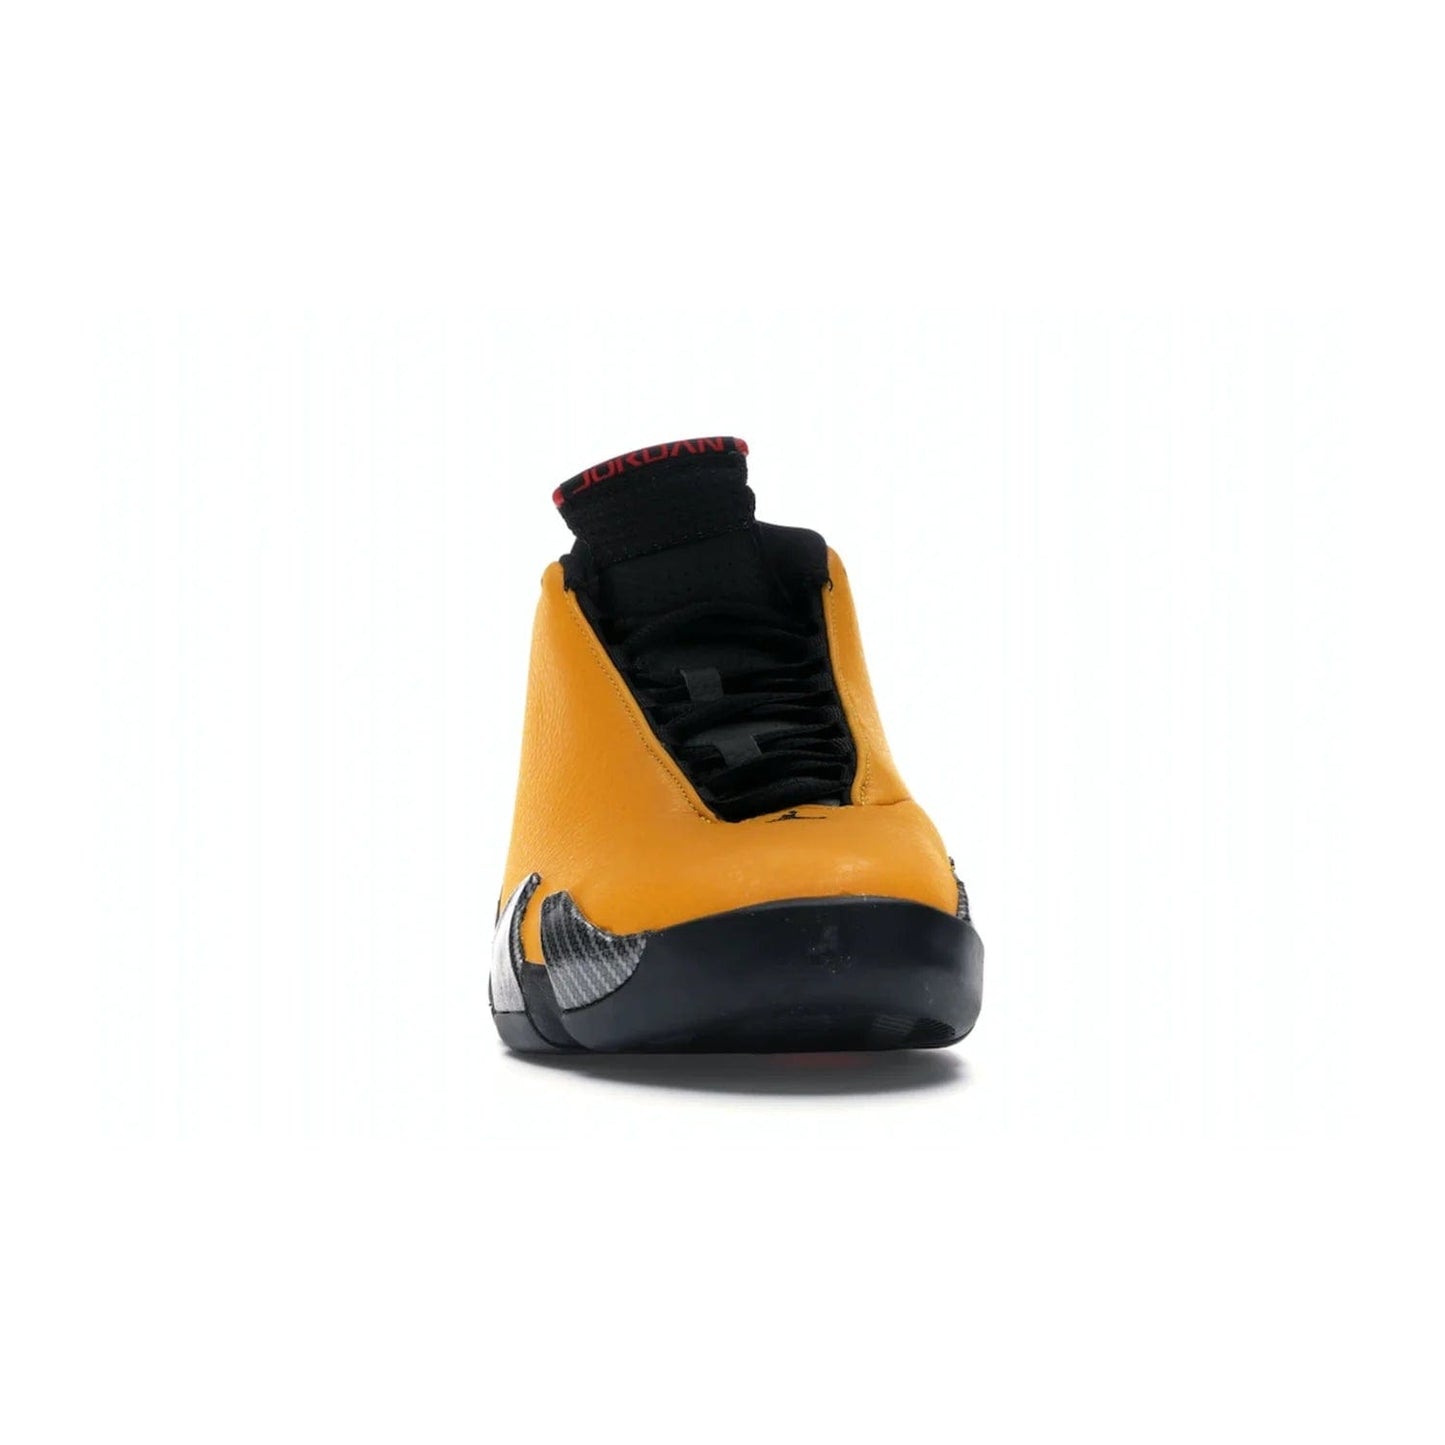 Jordan 14 Retro University Gold - Image 9 - Only at www.BallersClubKickz.com - Air Jordan 14 Retro University Gold: High-quality leather sneaker with Jumpman, tongue & heel logos. Zoom Air units & herringbone traction for superior comfort. University Gold outsole for stylish streetwear.